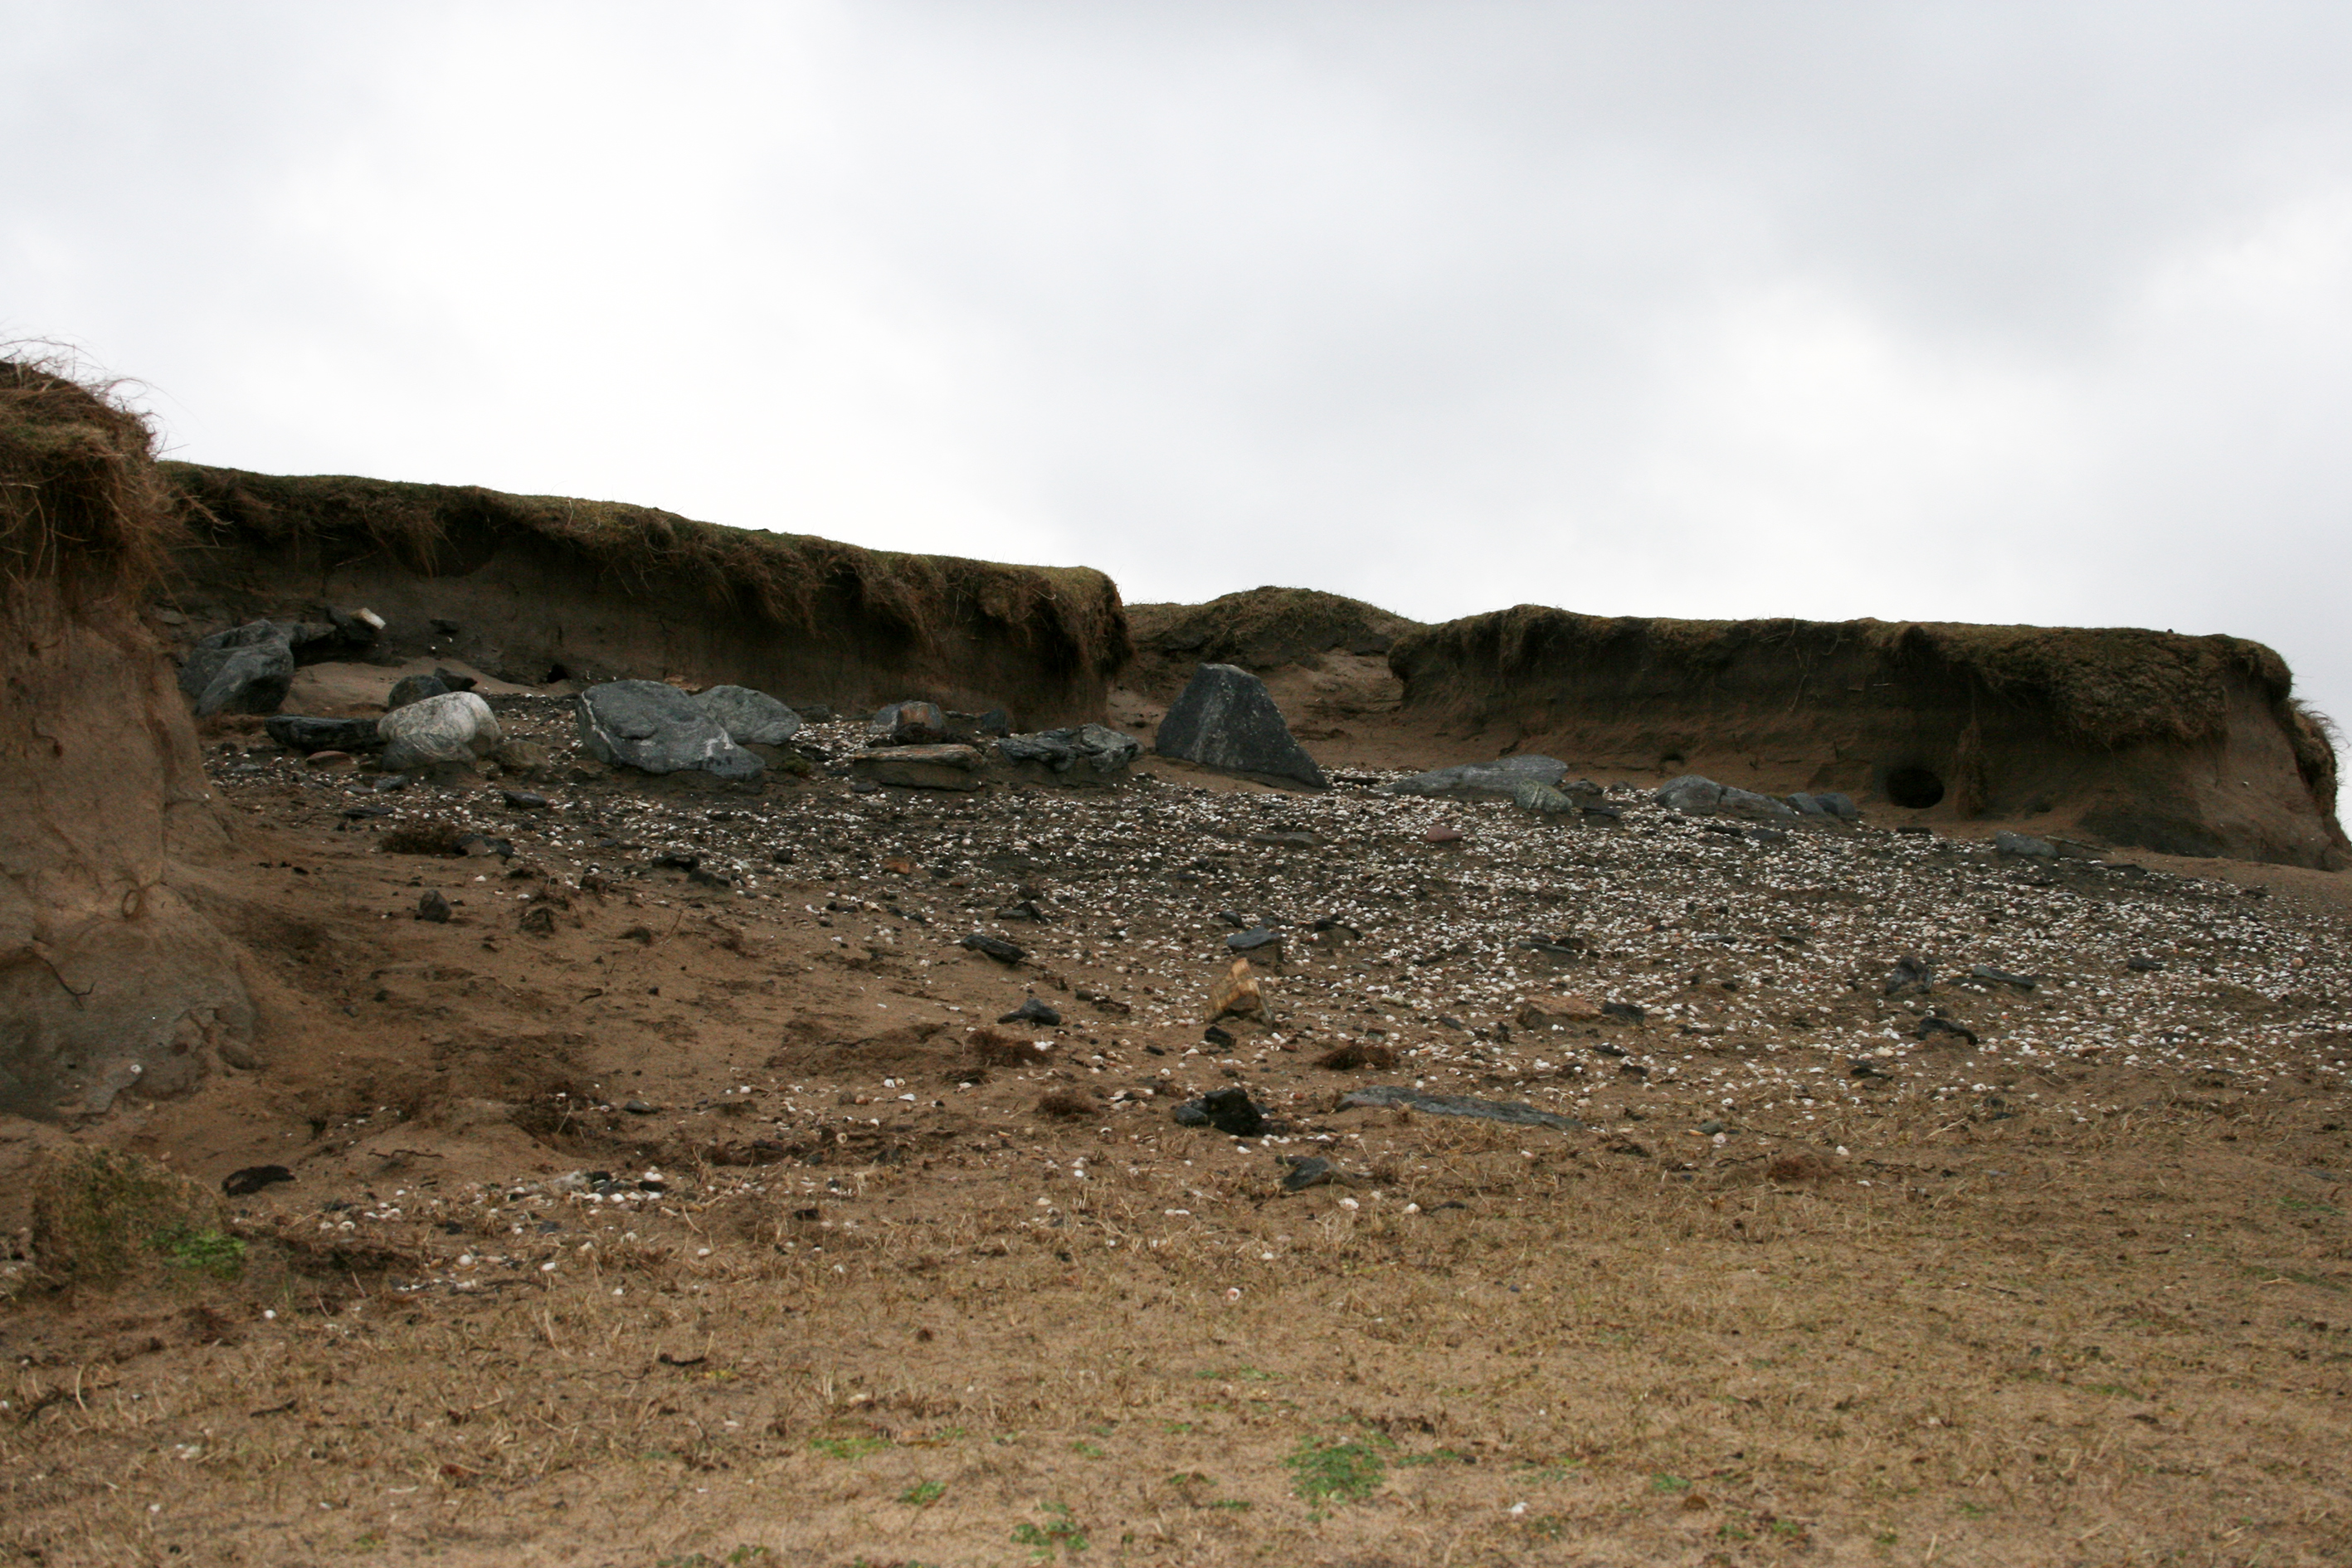 Site looking South. Note fire-cracked stone in the foreground.